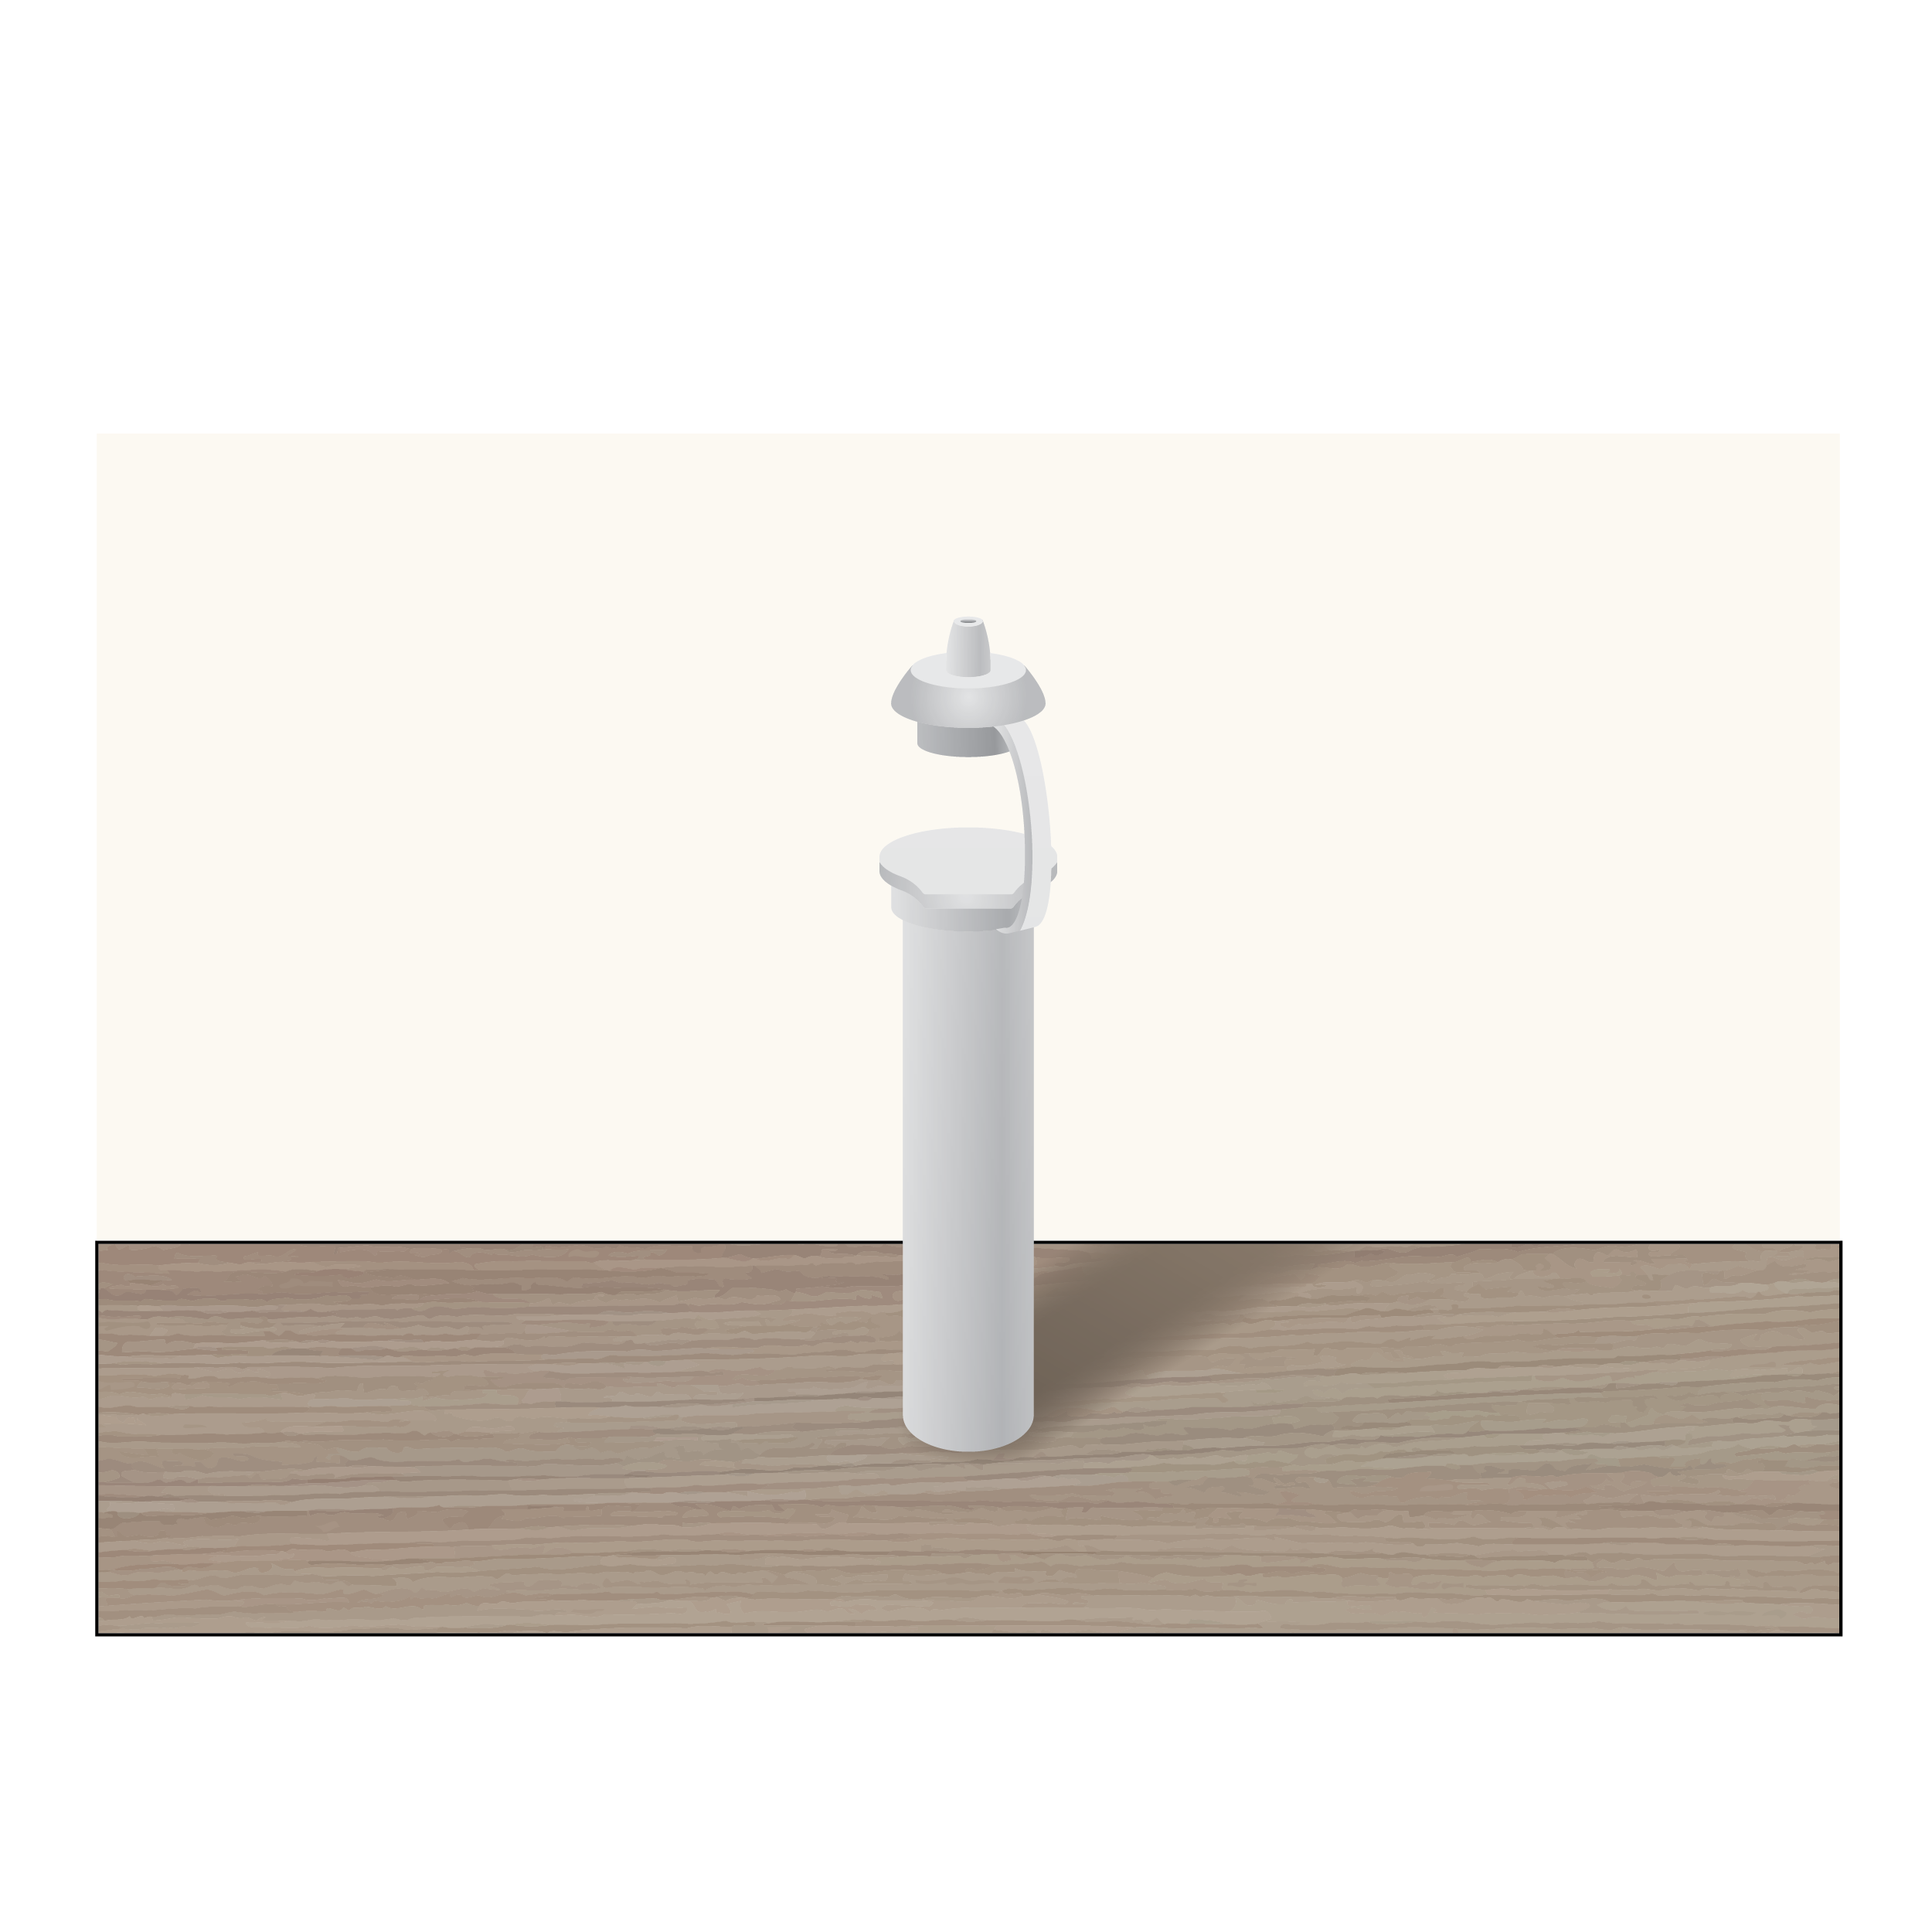 Three-dimensional rendering representing a photo of a cylindrical gray fluid vial with an integrated dropper cap standing on a wooden table in front of an off-white background.